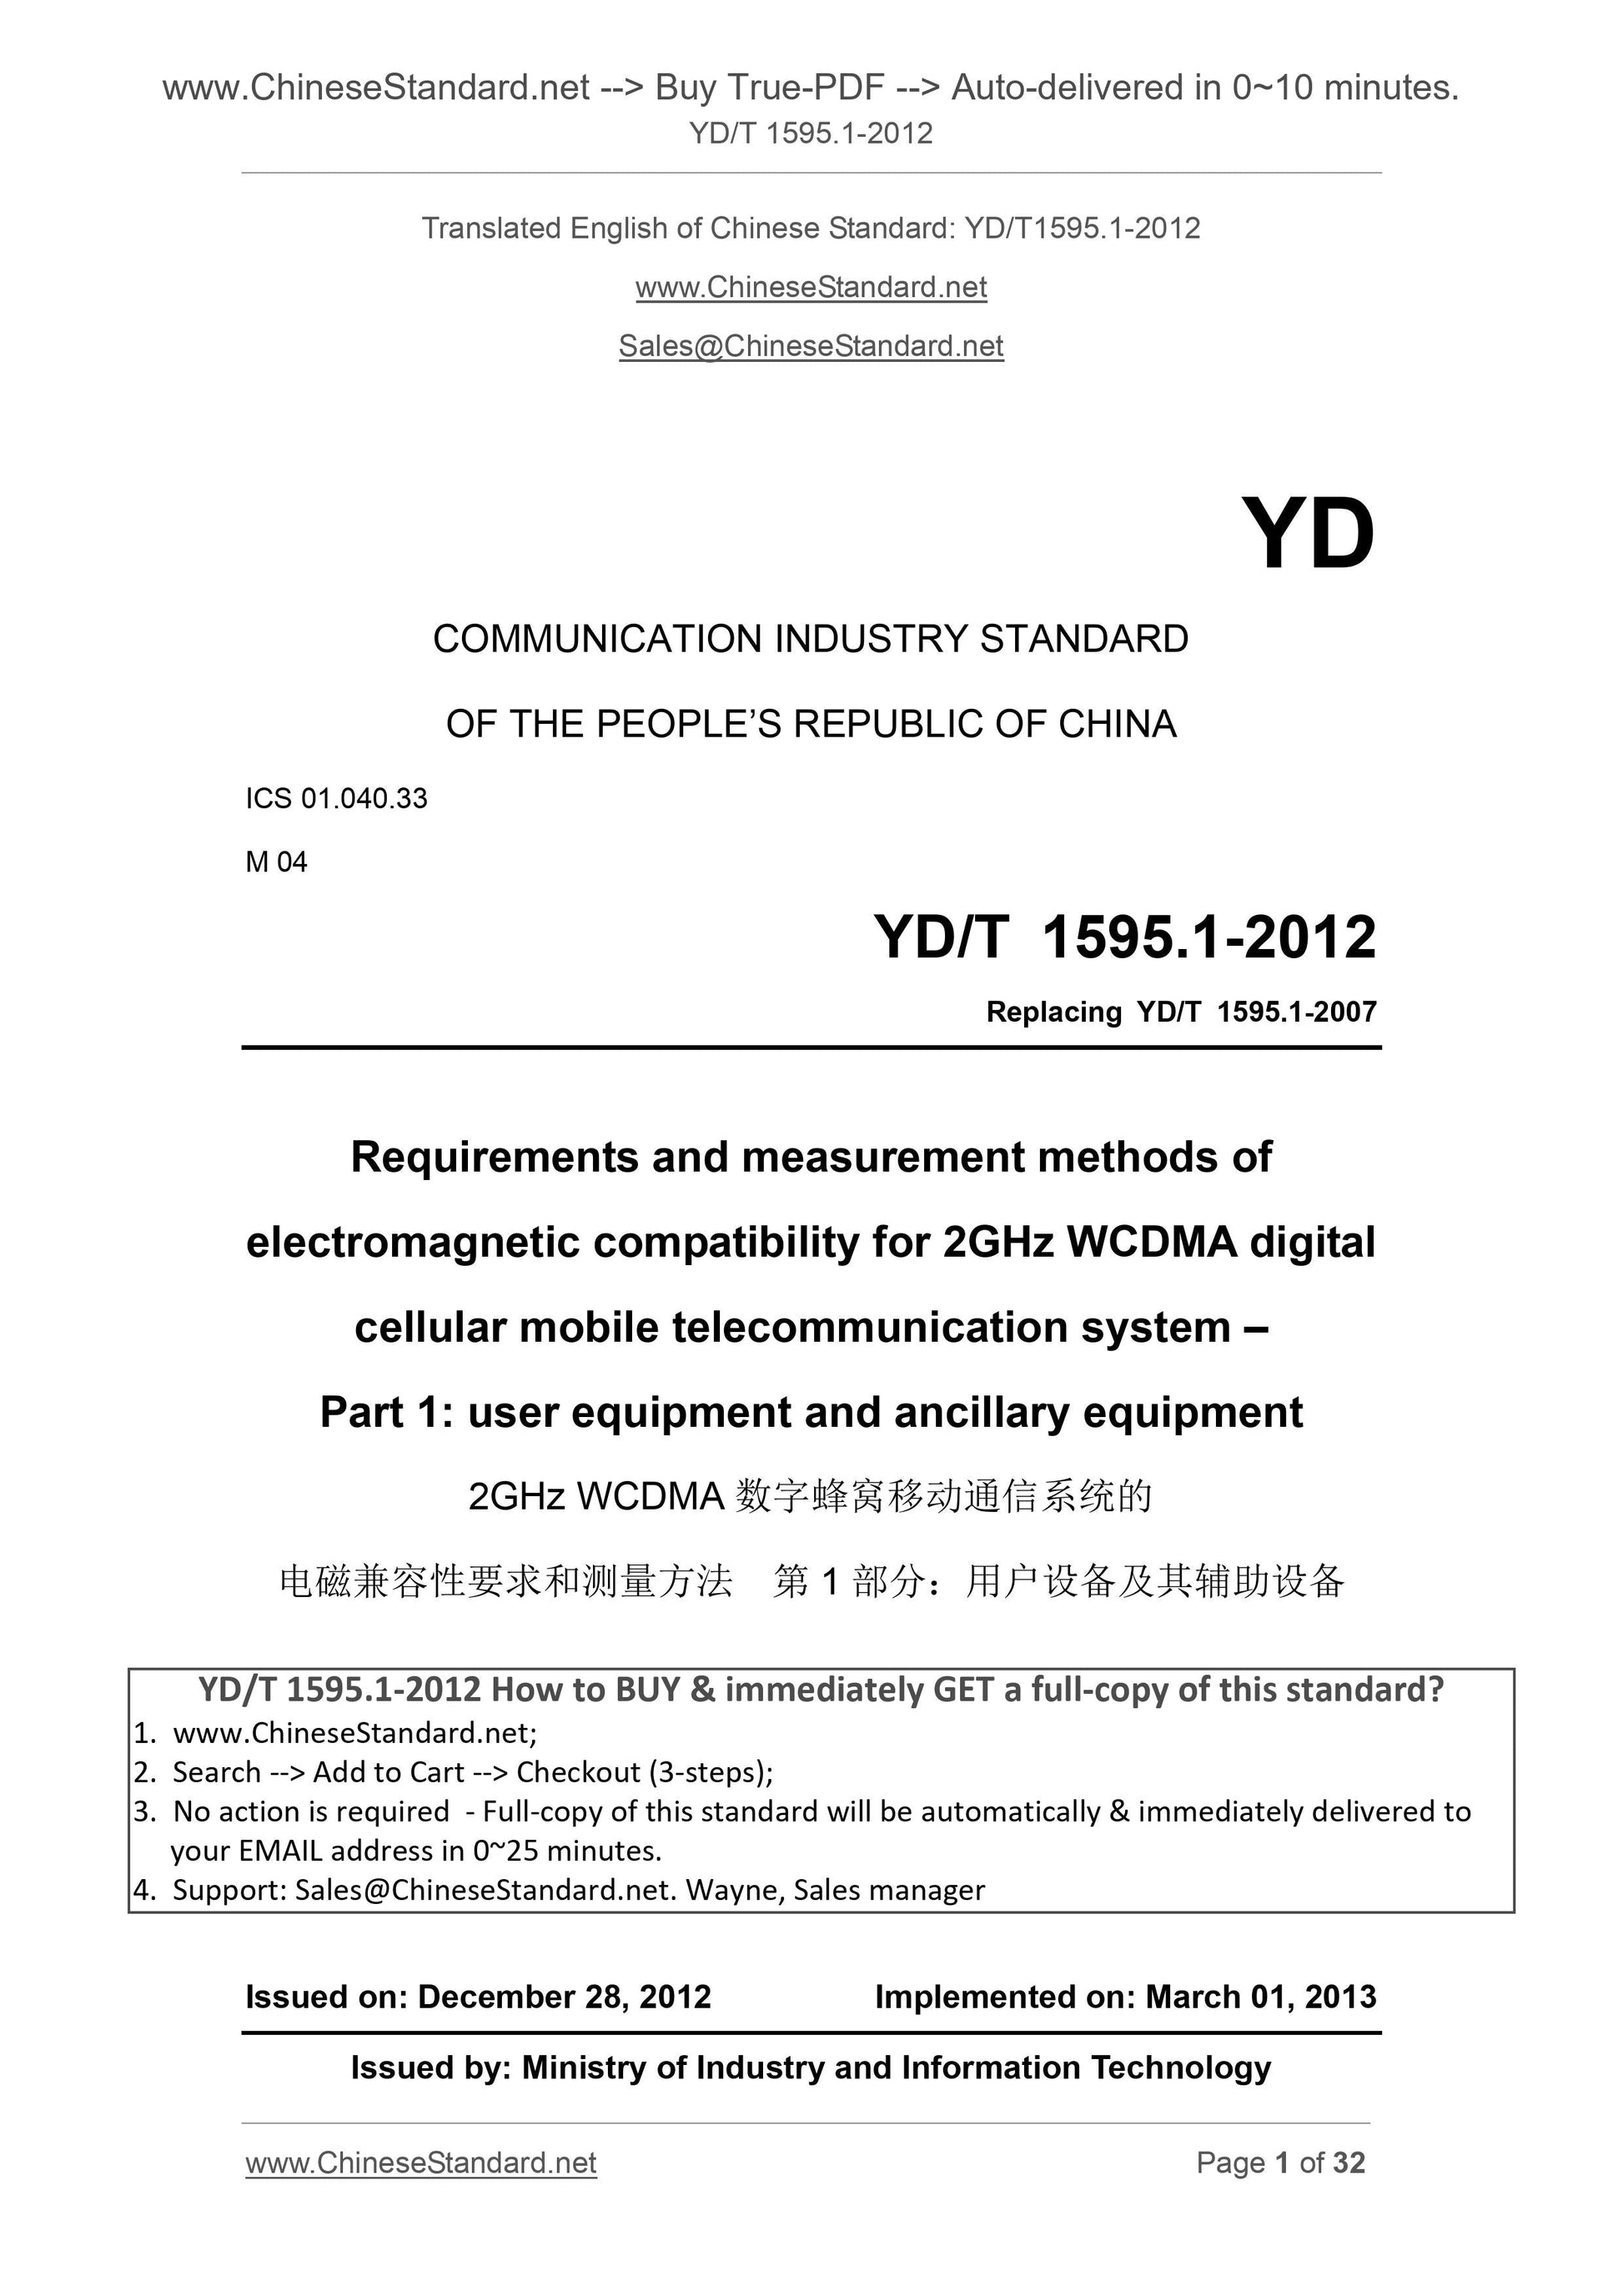 YD/T 1595.1-2012 Page 1